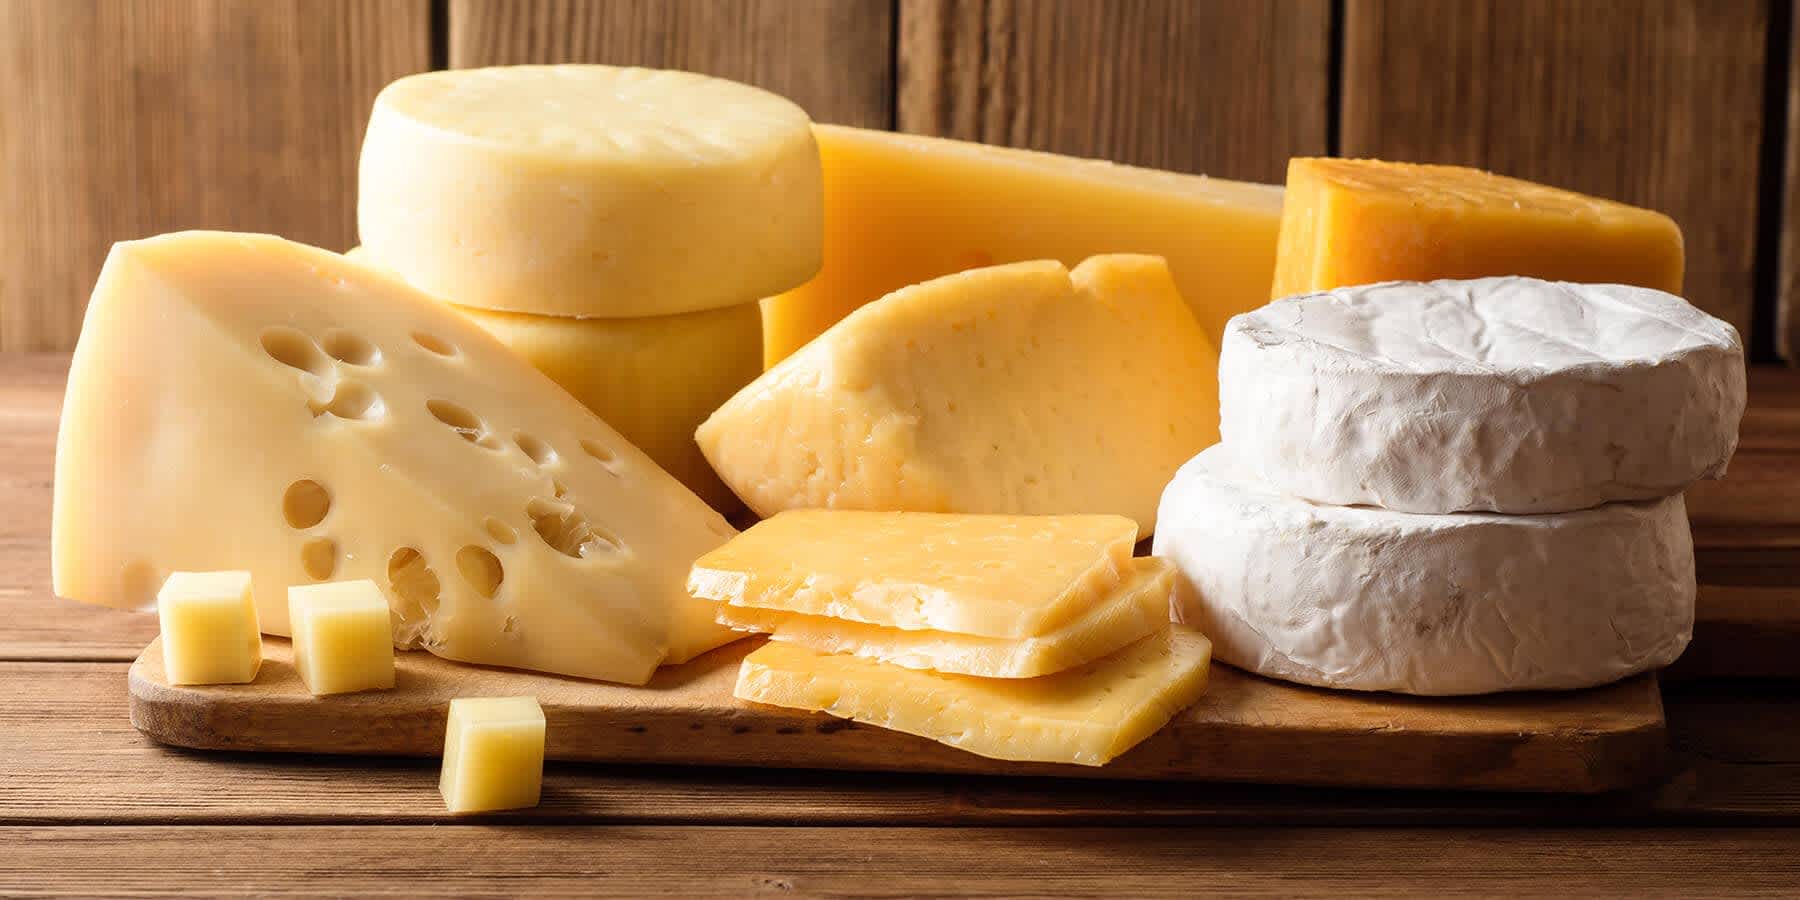 Dairy products (cheese) that may increase LDL cholesterol